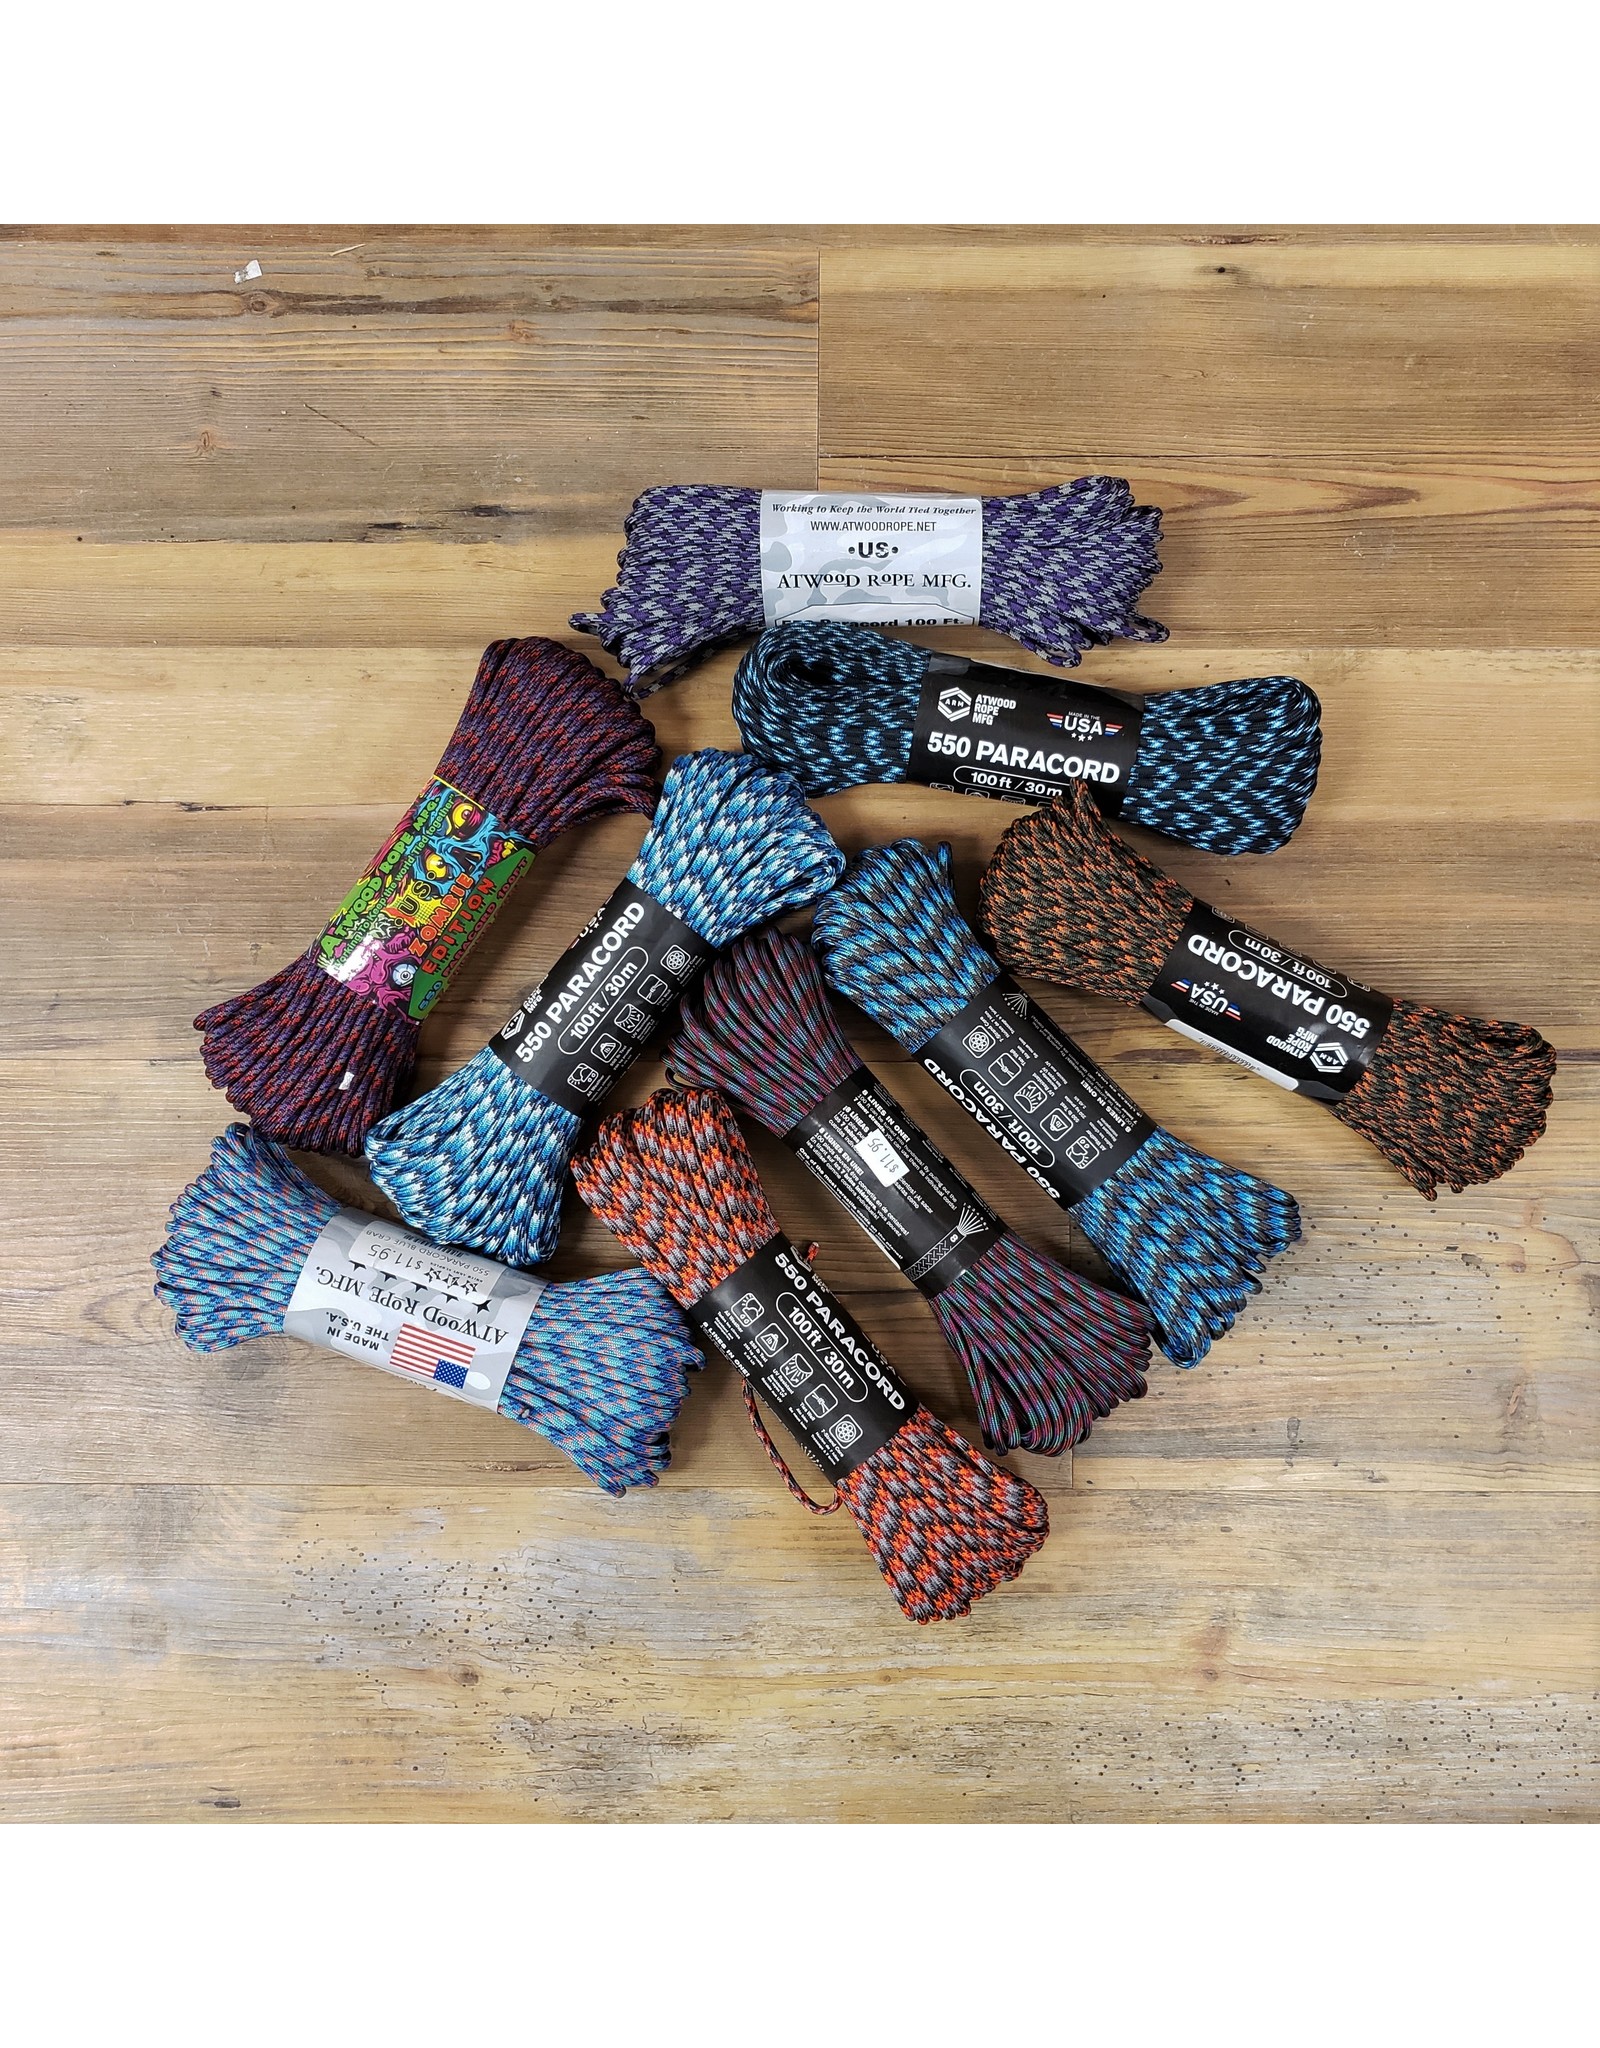 ATWOOD ROPE MFG 550 PARACORD NOVELTY DESIGNS